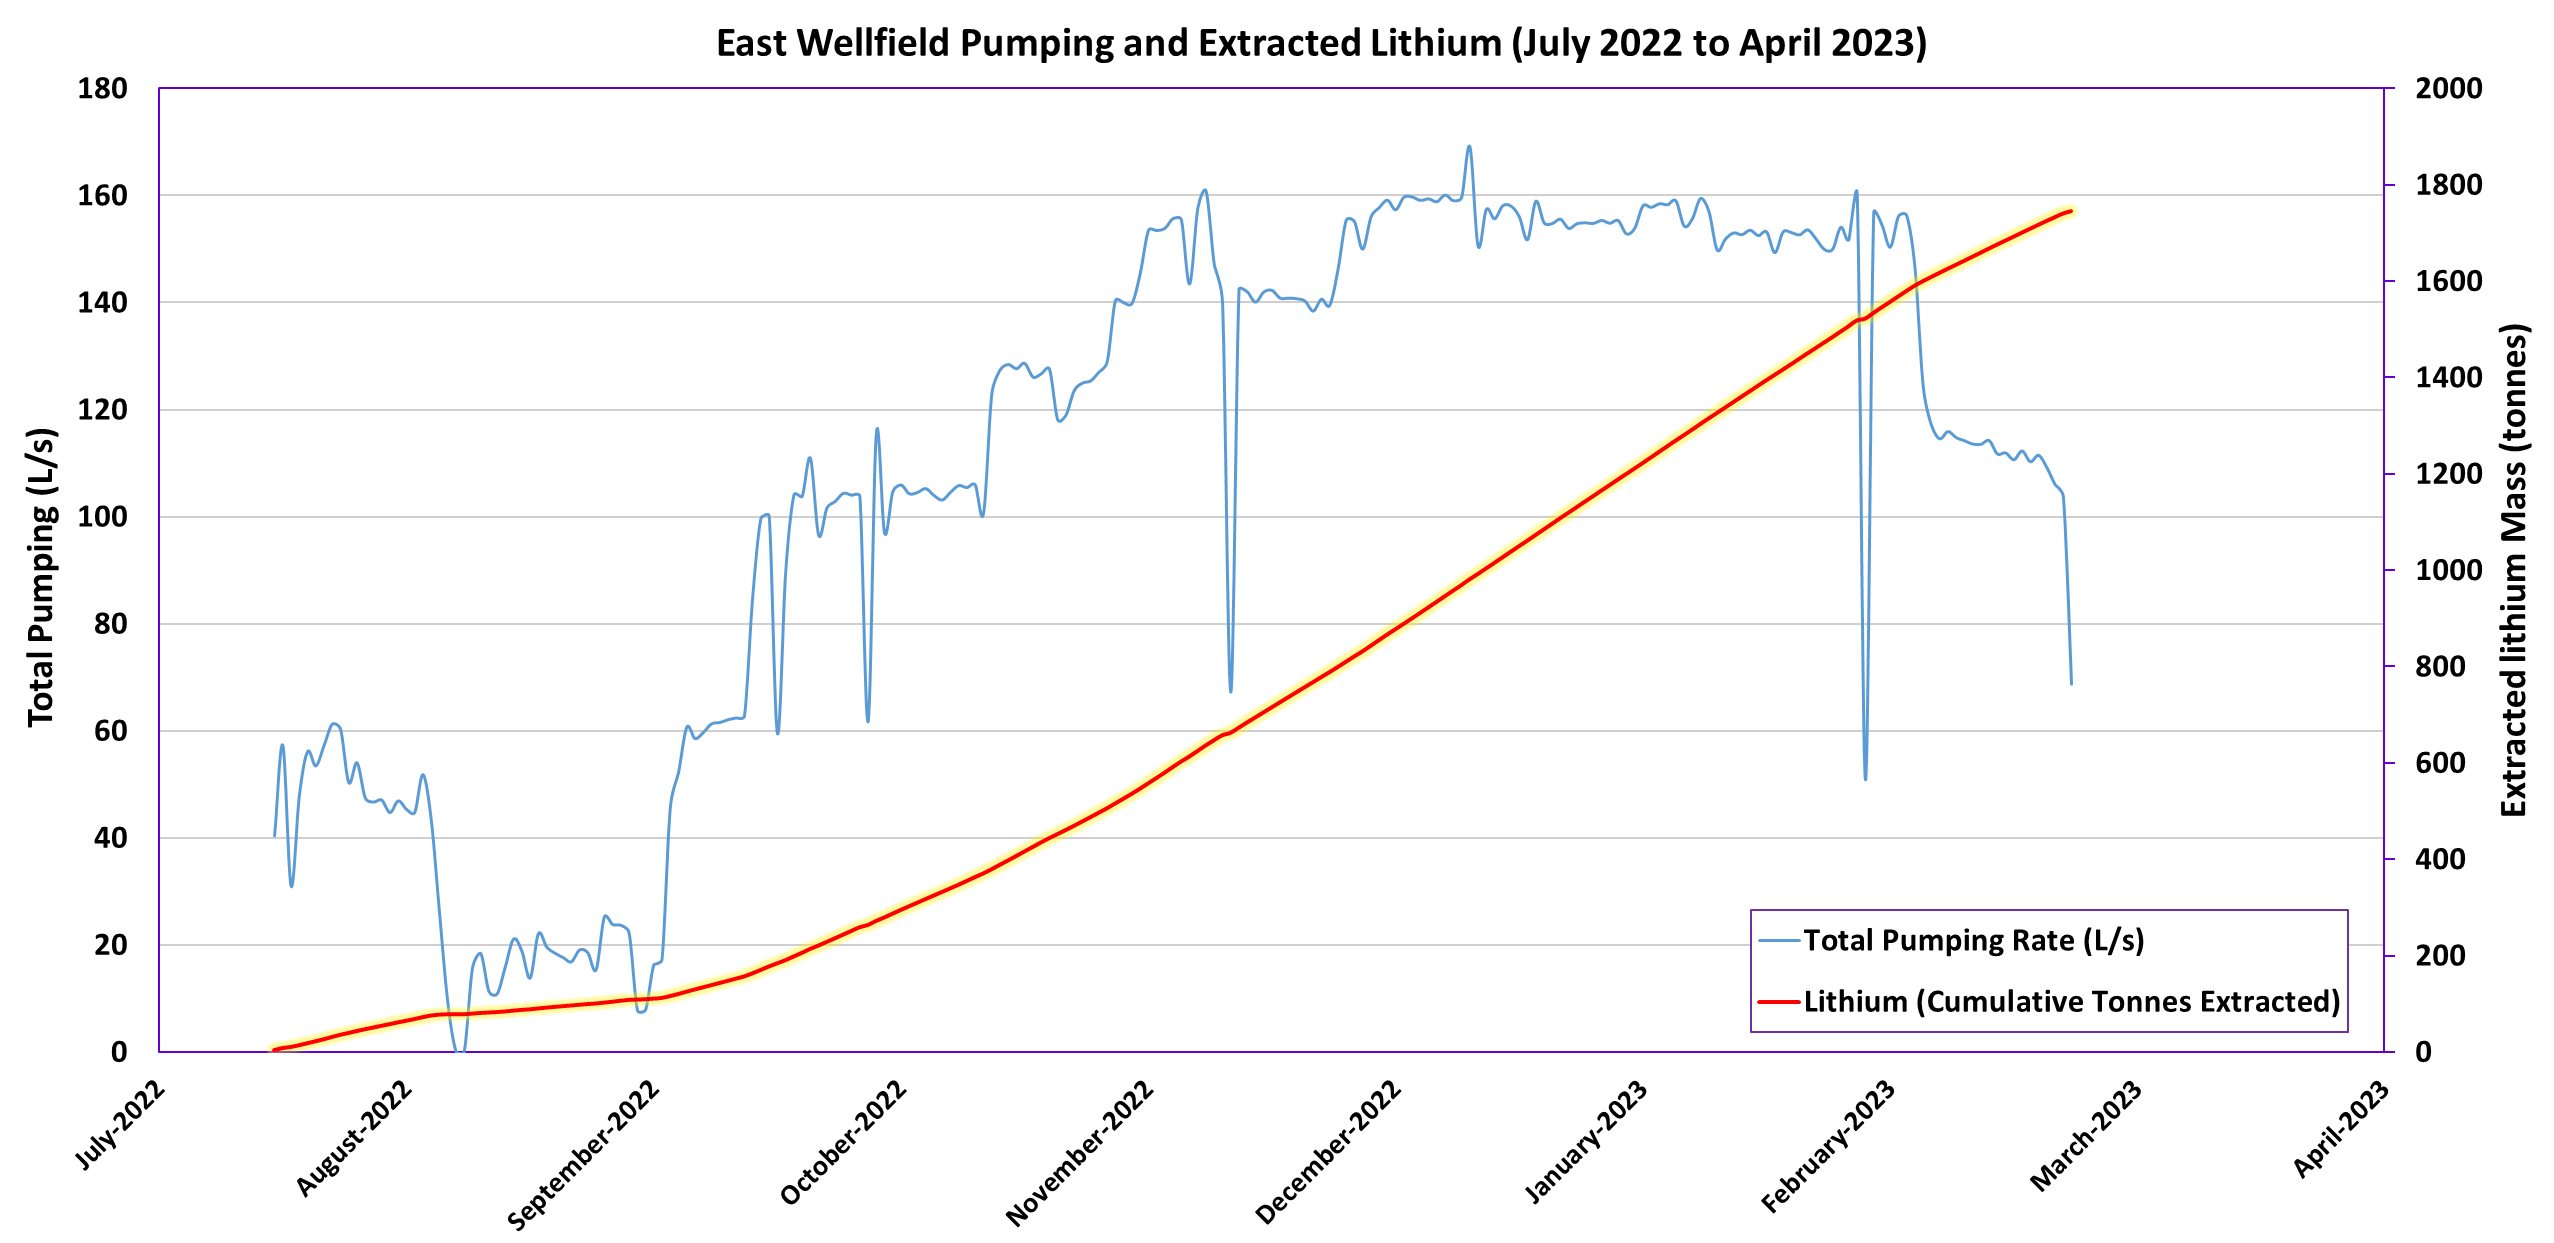 Registered pumping and extracted lithium from the Stage 1 eastern wellfield